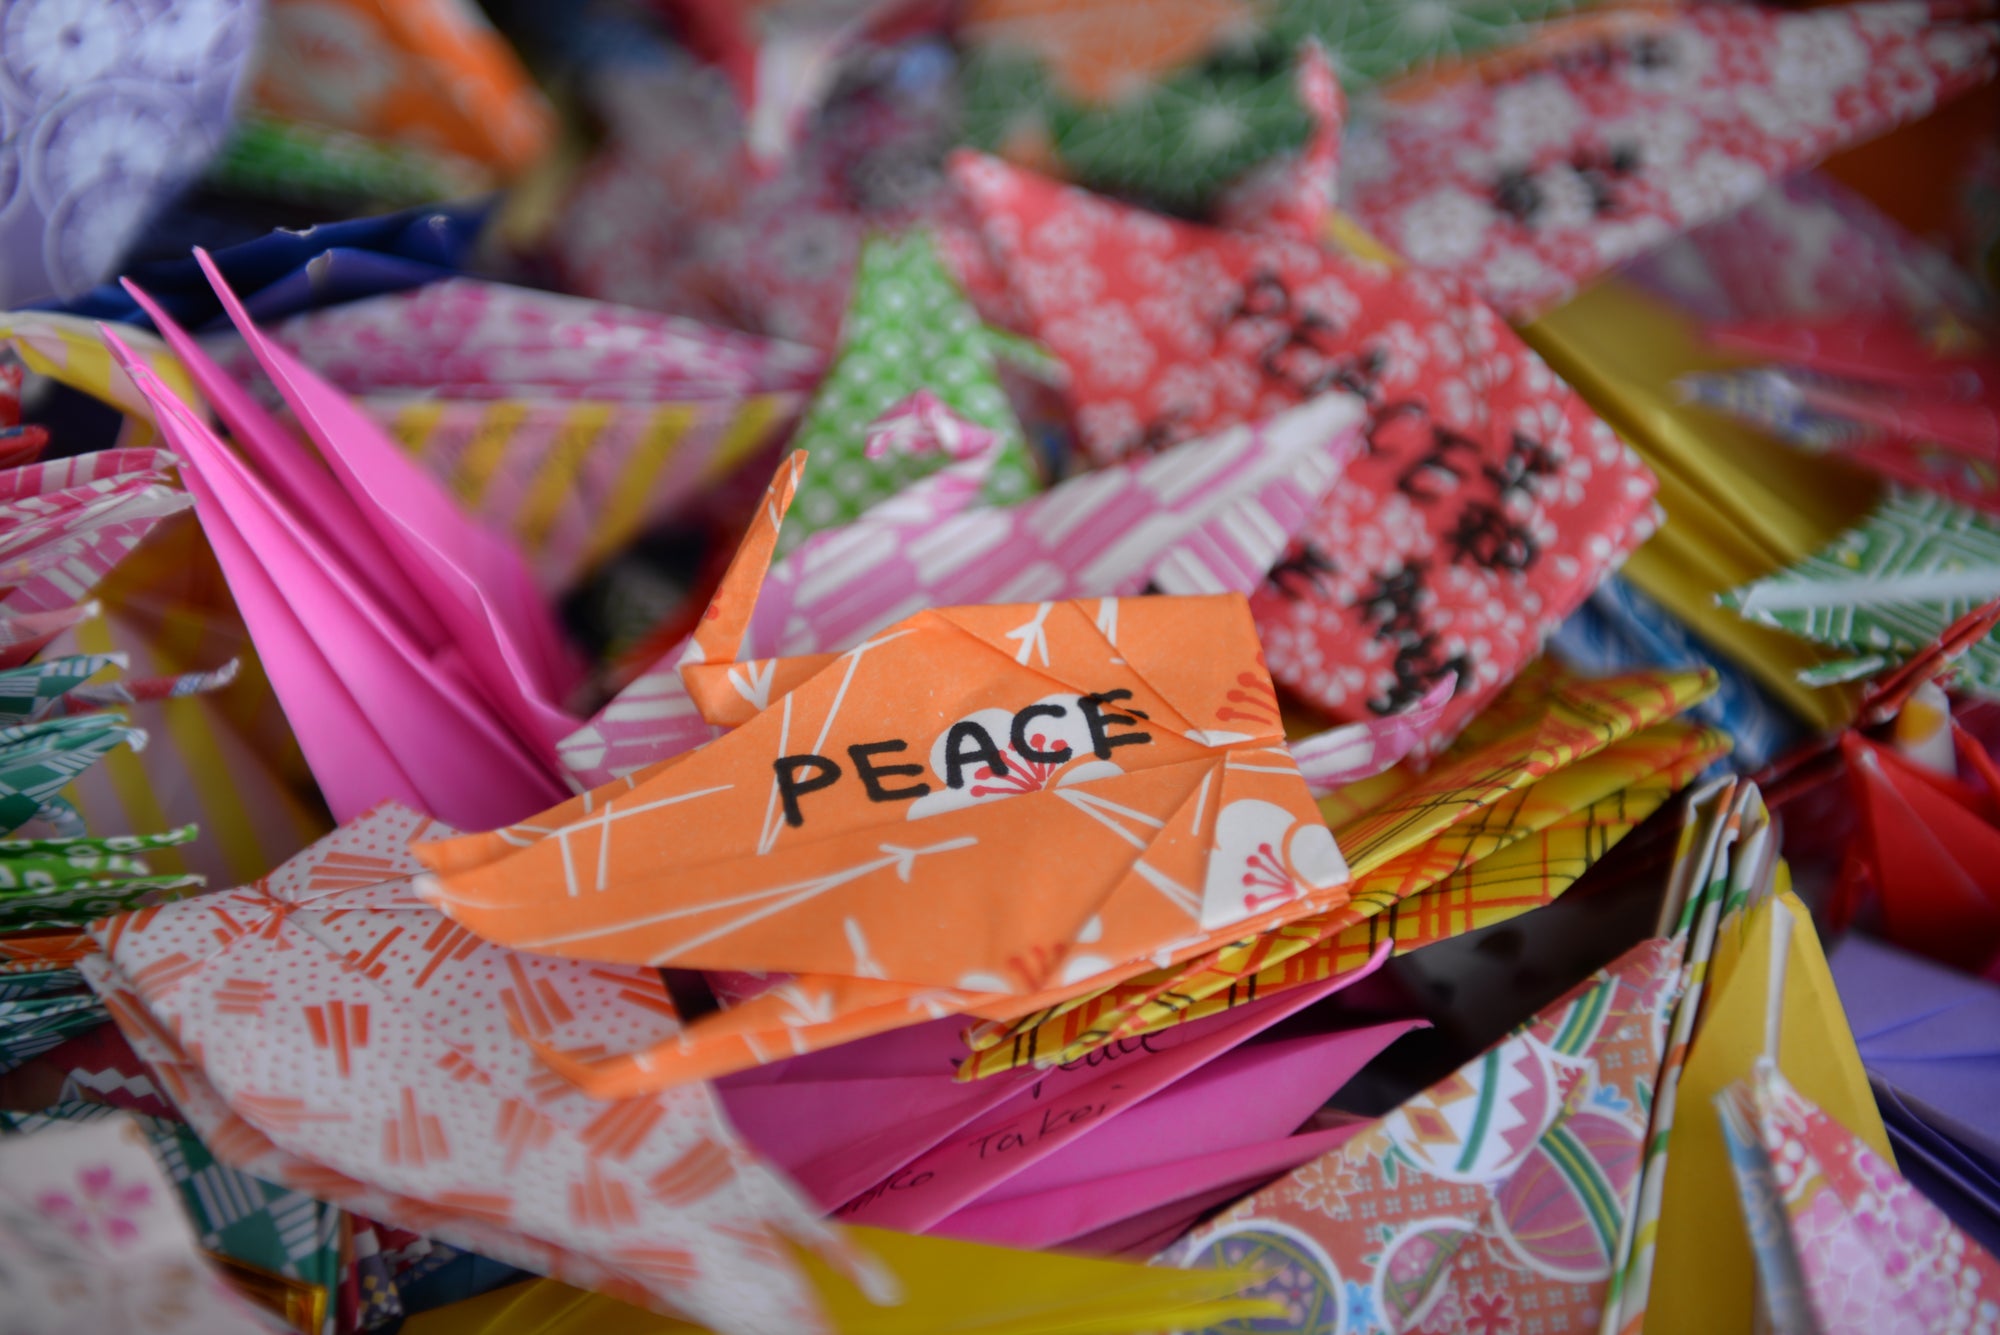 Folding Origami Cranes Of Peace At Pearl Harbor - A Fun And Free Activity For The Whole Family